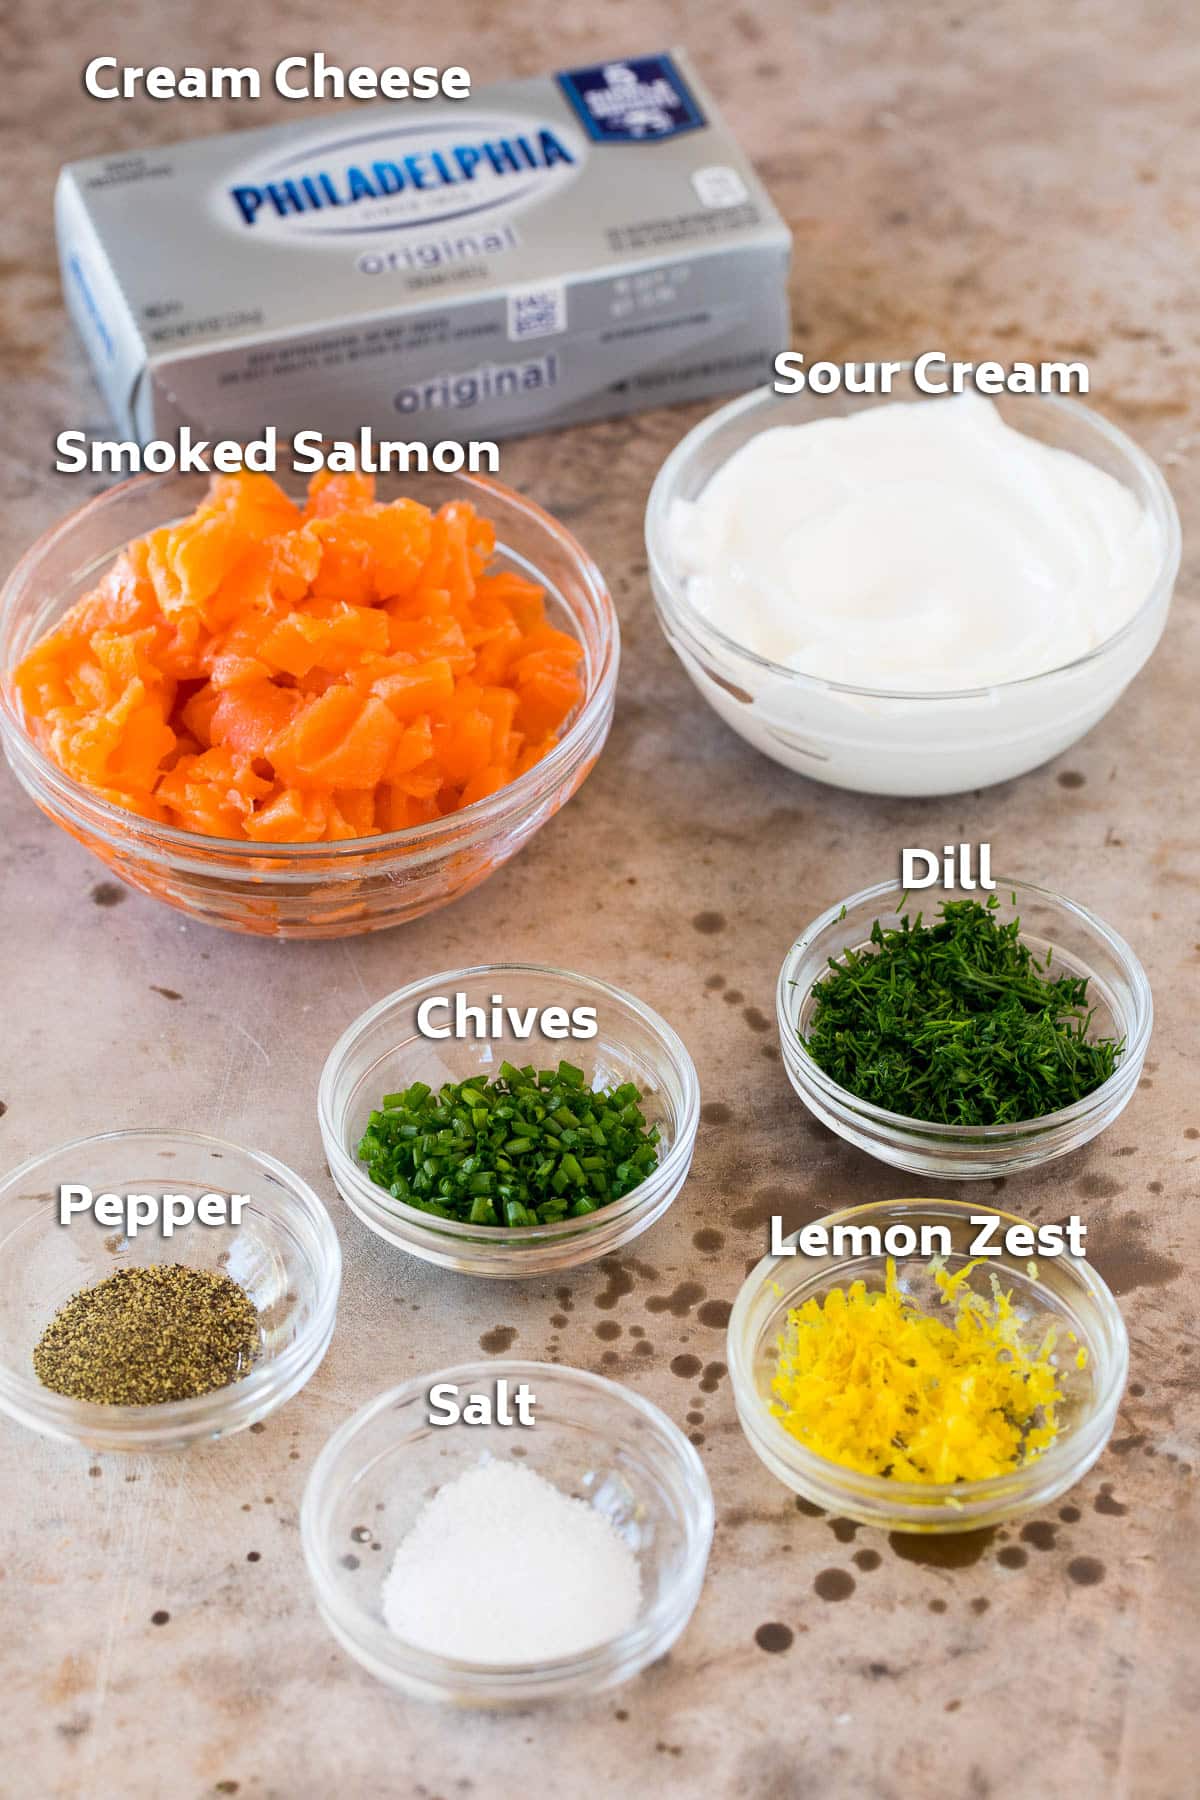 Ingredients including cream cheese, sour cream and seasonings.